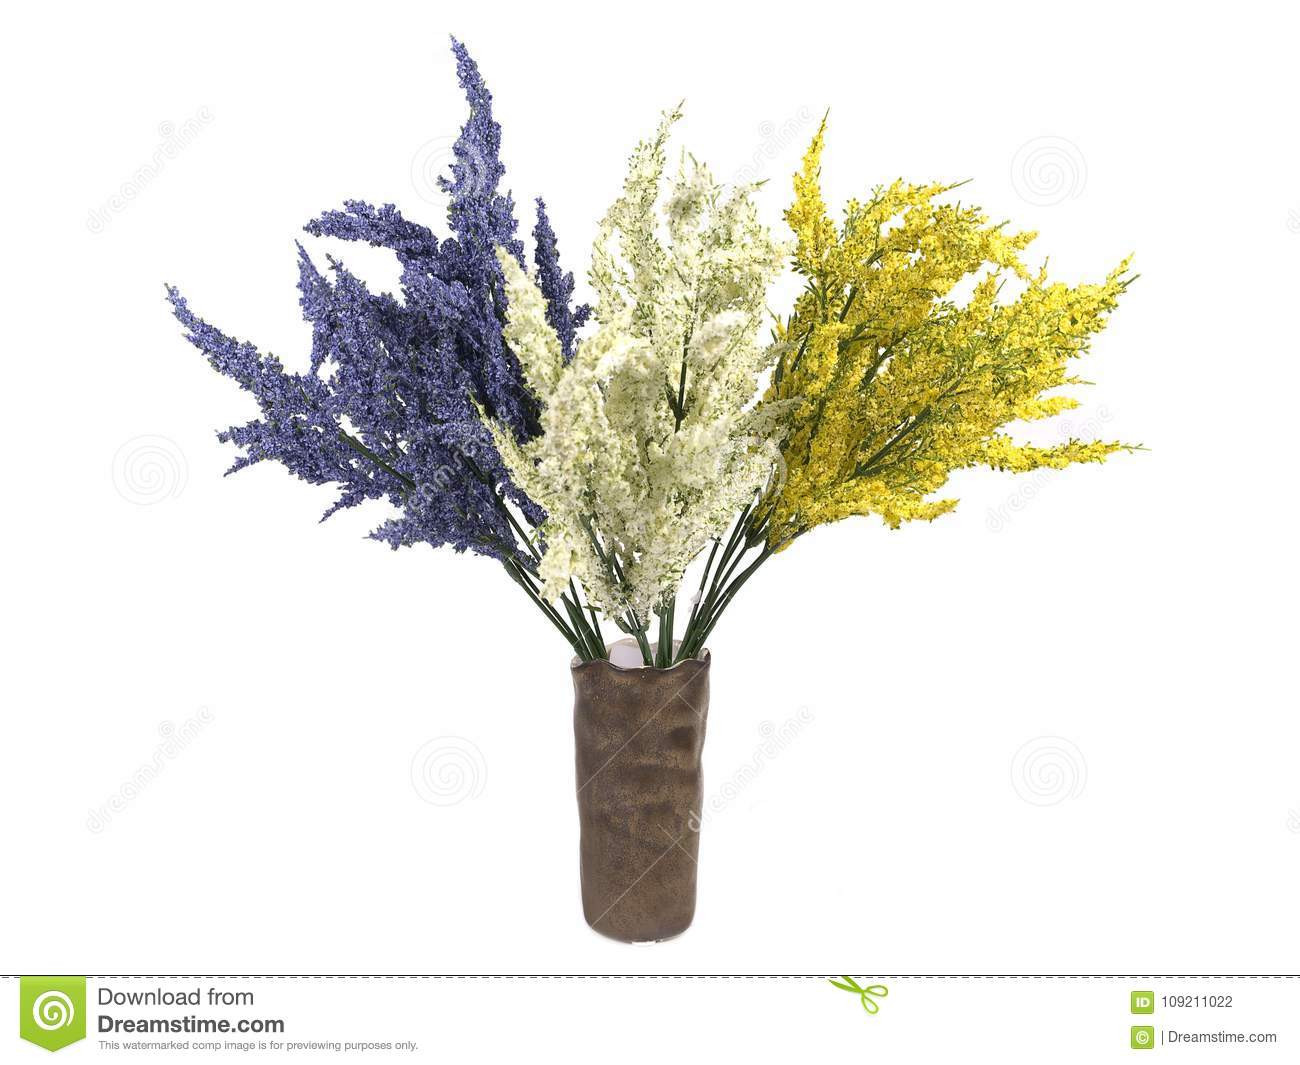 18 Lovable White Birch Bark Vases 2022 free download white birch bark vases of multicolored flowers in a vase isolated on white background stock intended for colorful flower bouquet arrangement in vase isolated on white background